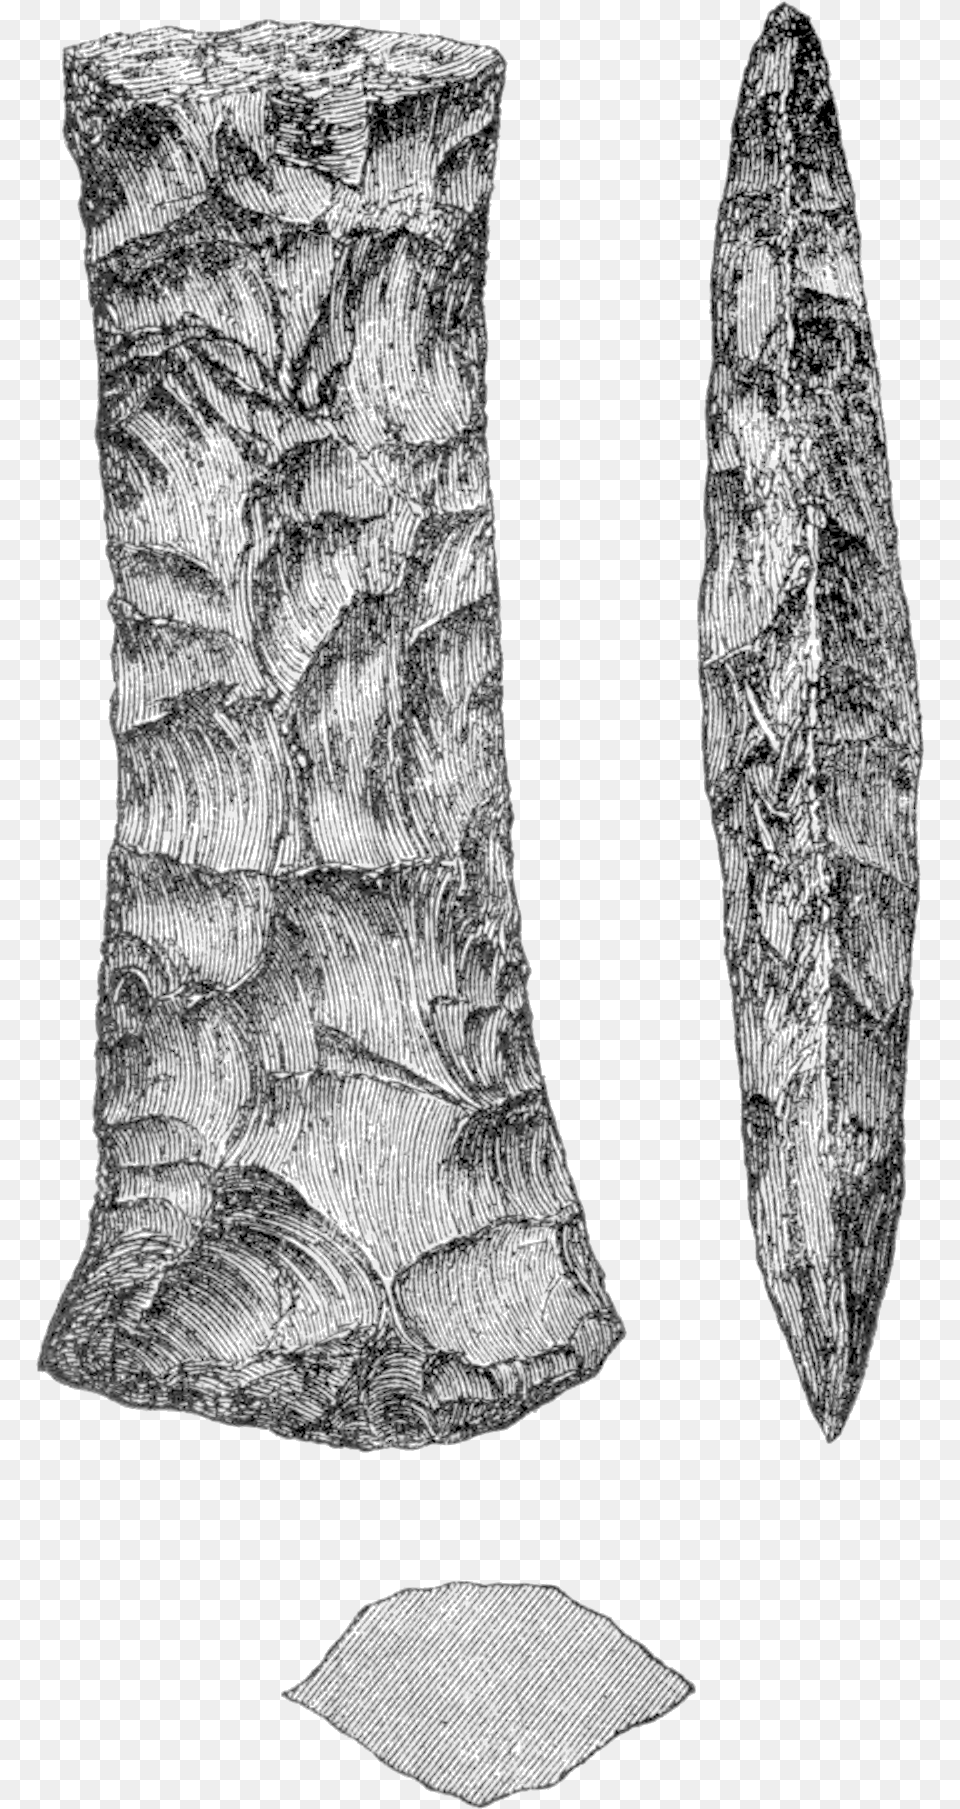 The Ancient Stone Implements 0096a Sketch, Rock Free Png Download